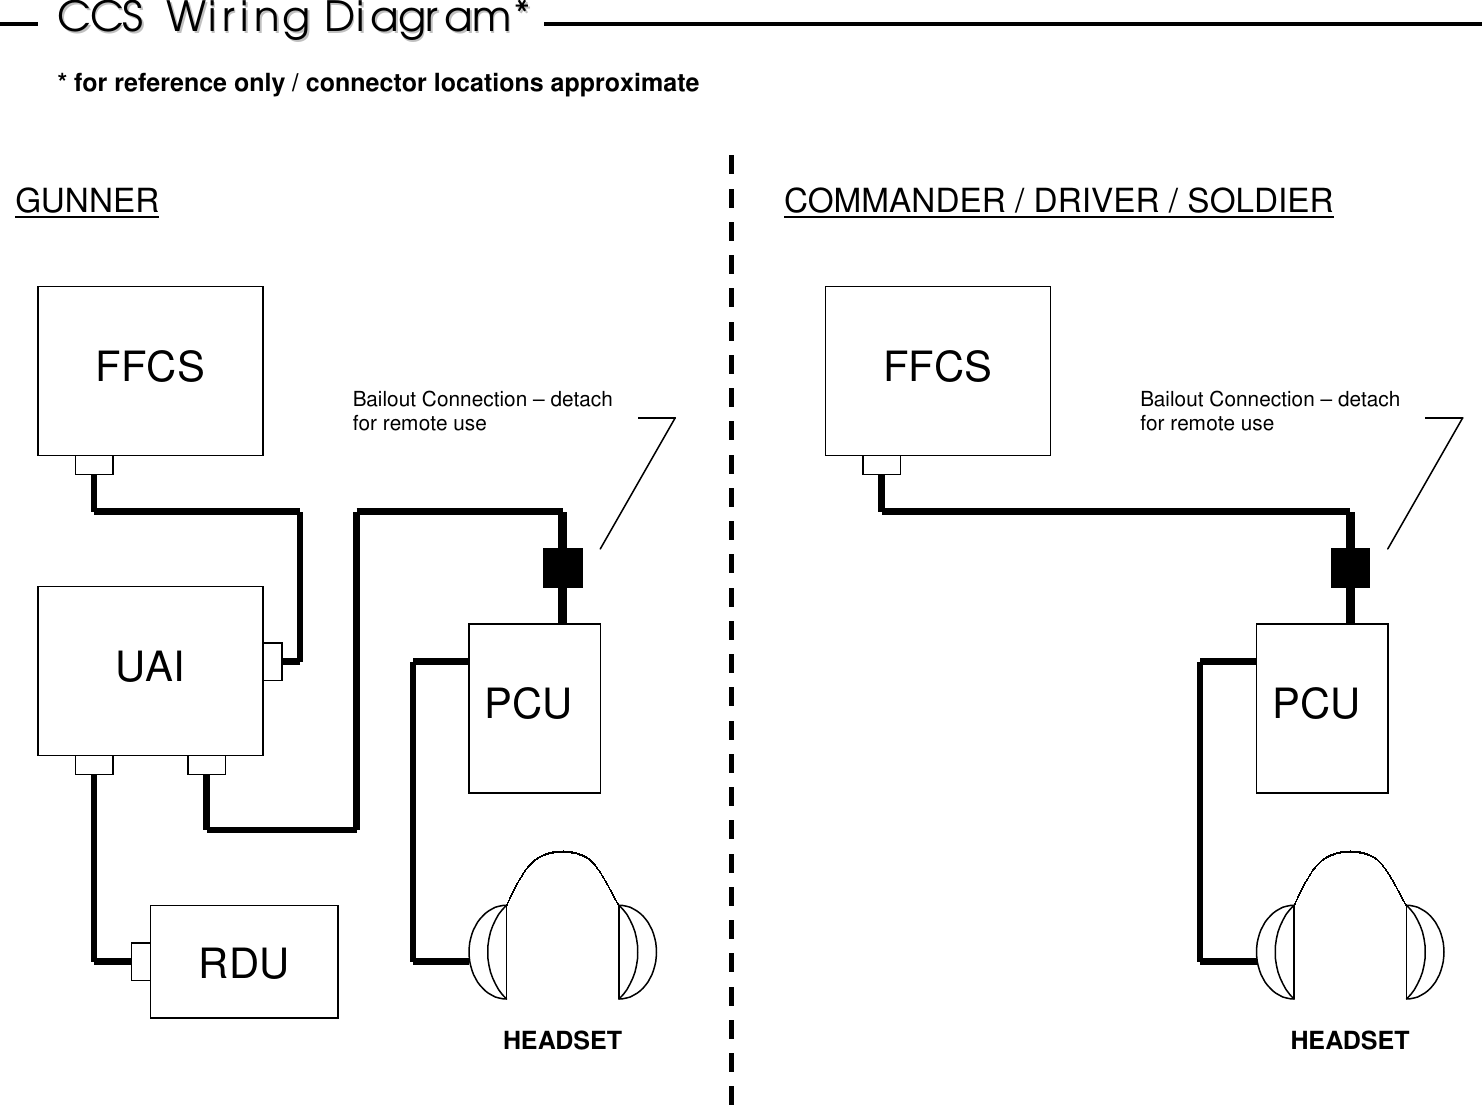 CCCCSS  WWiirriinngg  DDiiaaggrraamm*** for reference only / connector locations approximateUAIRDUPCUHEADSETBailout Connection – detachfor remote useFFCSPCUHEADSETBailout Connection – detachfor remote useGUNNERCOMMANDER / DRIVER / SOLDIERFFCS